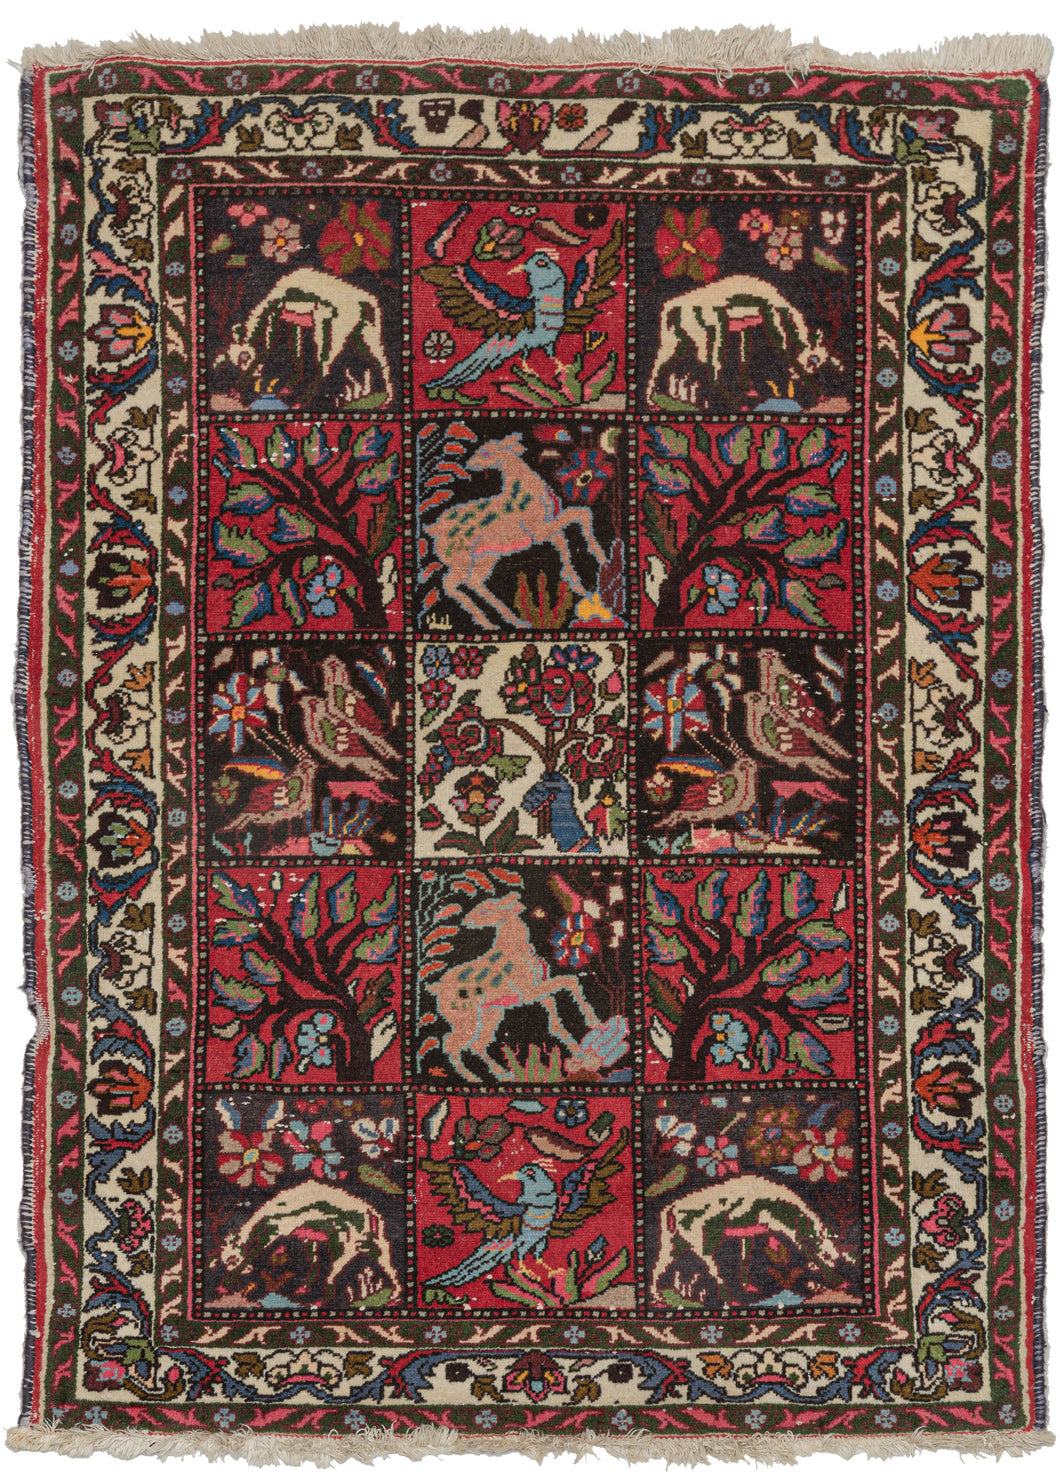 This Flora and Fauna Bakhtiari Rug features a classic grid garden design full of flora and fauna including deer, birds, and flowering branches. Of particular note is the central square which wonderfully and unexpectedly showcases a blue hand with pink nails holding a bouquet of fresh cut flowers.